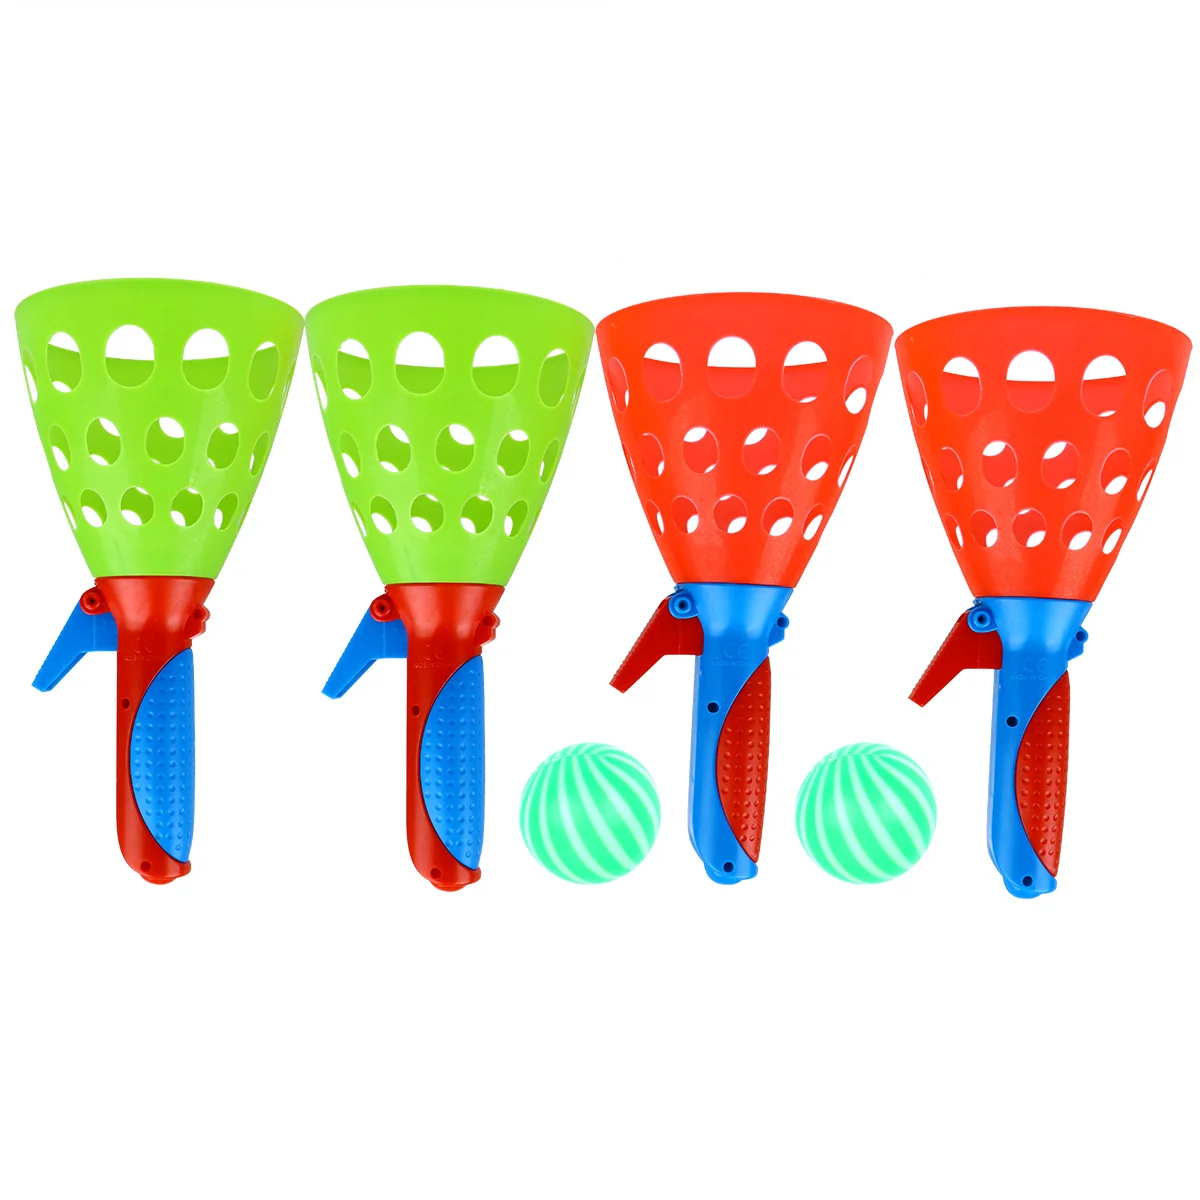 

Catch Launcher Baskets with Balls: Catch Game for Fun Outdoor Indoor Backyard Games Activities Hand and Eye Concentration